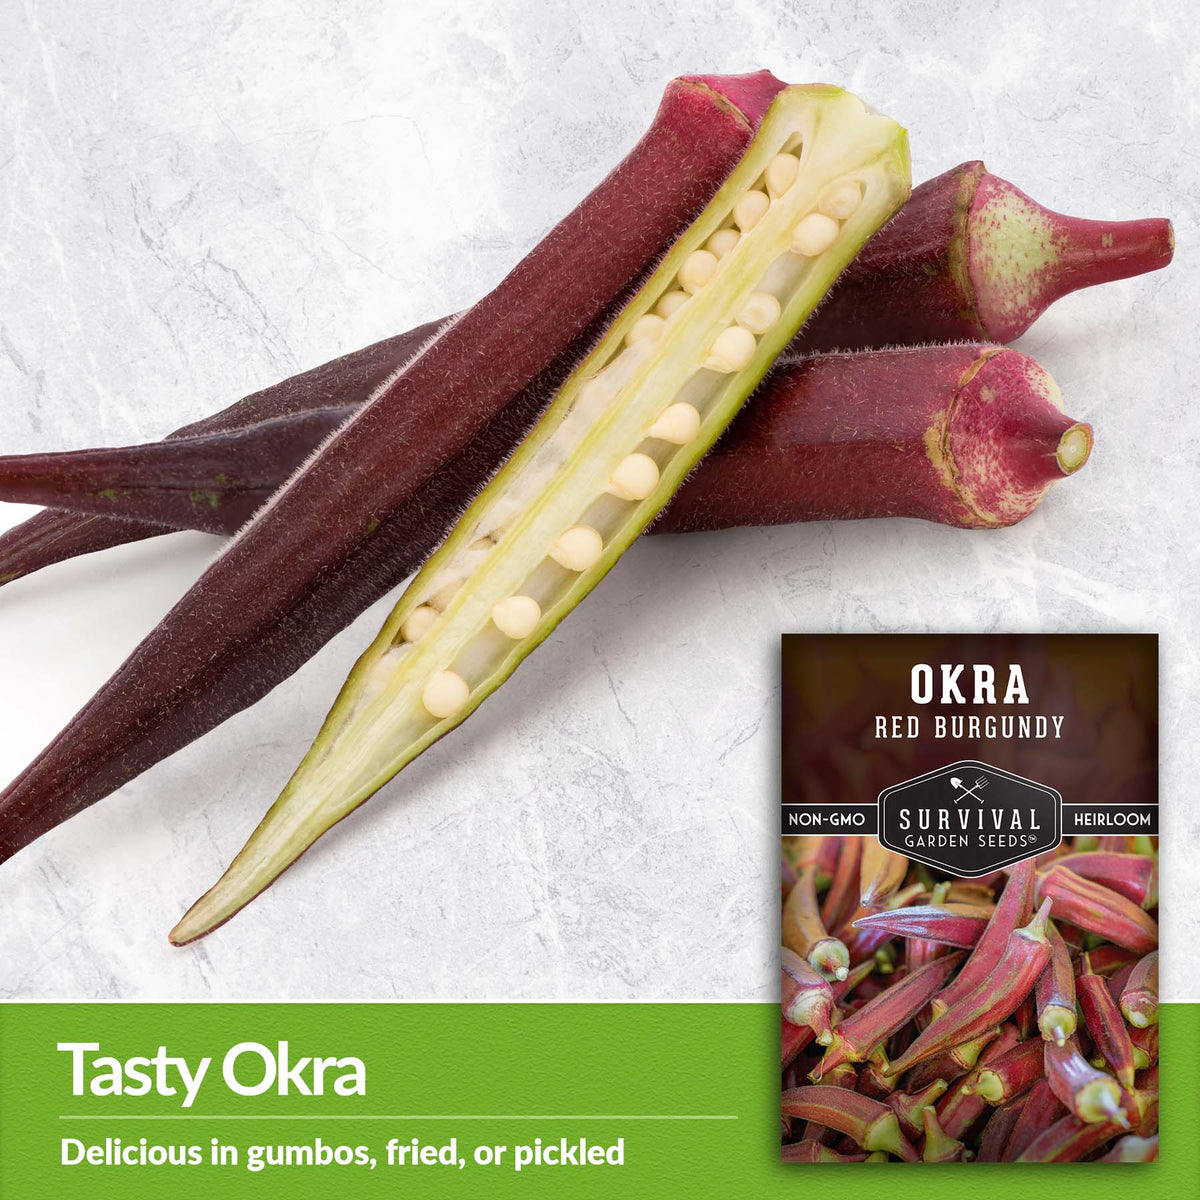 Okra is delicious in gumbos, fried or pickled